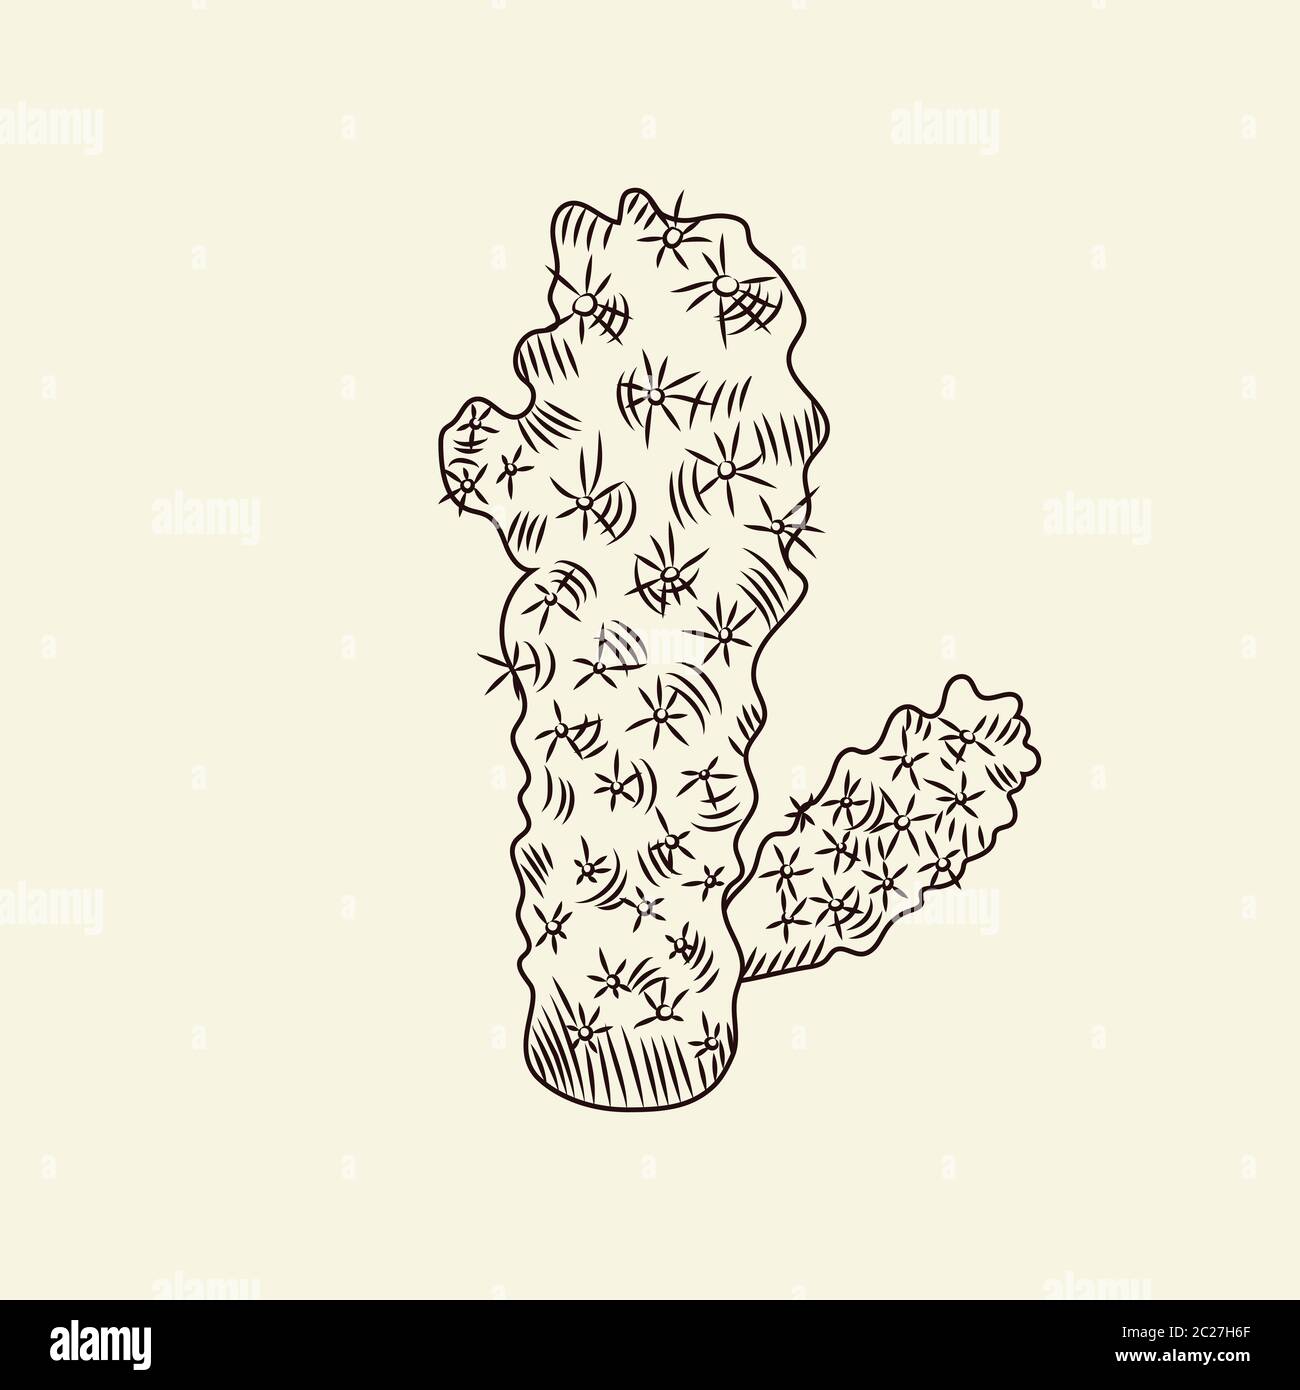 Wild cacti sketch. Mammillaria cactus isolated on light background. Engraving vintage style. Vector illustration. Stock Vector